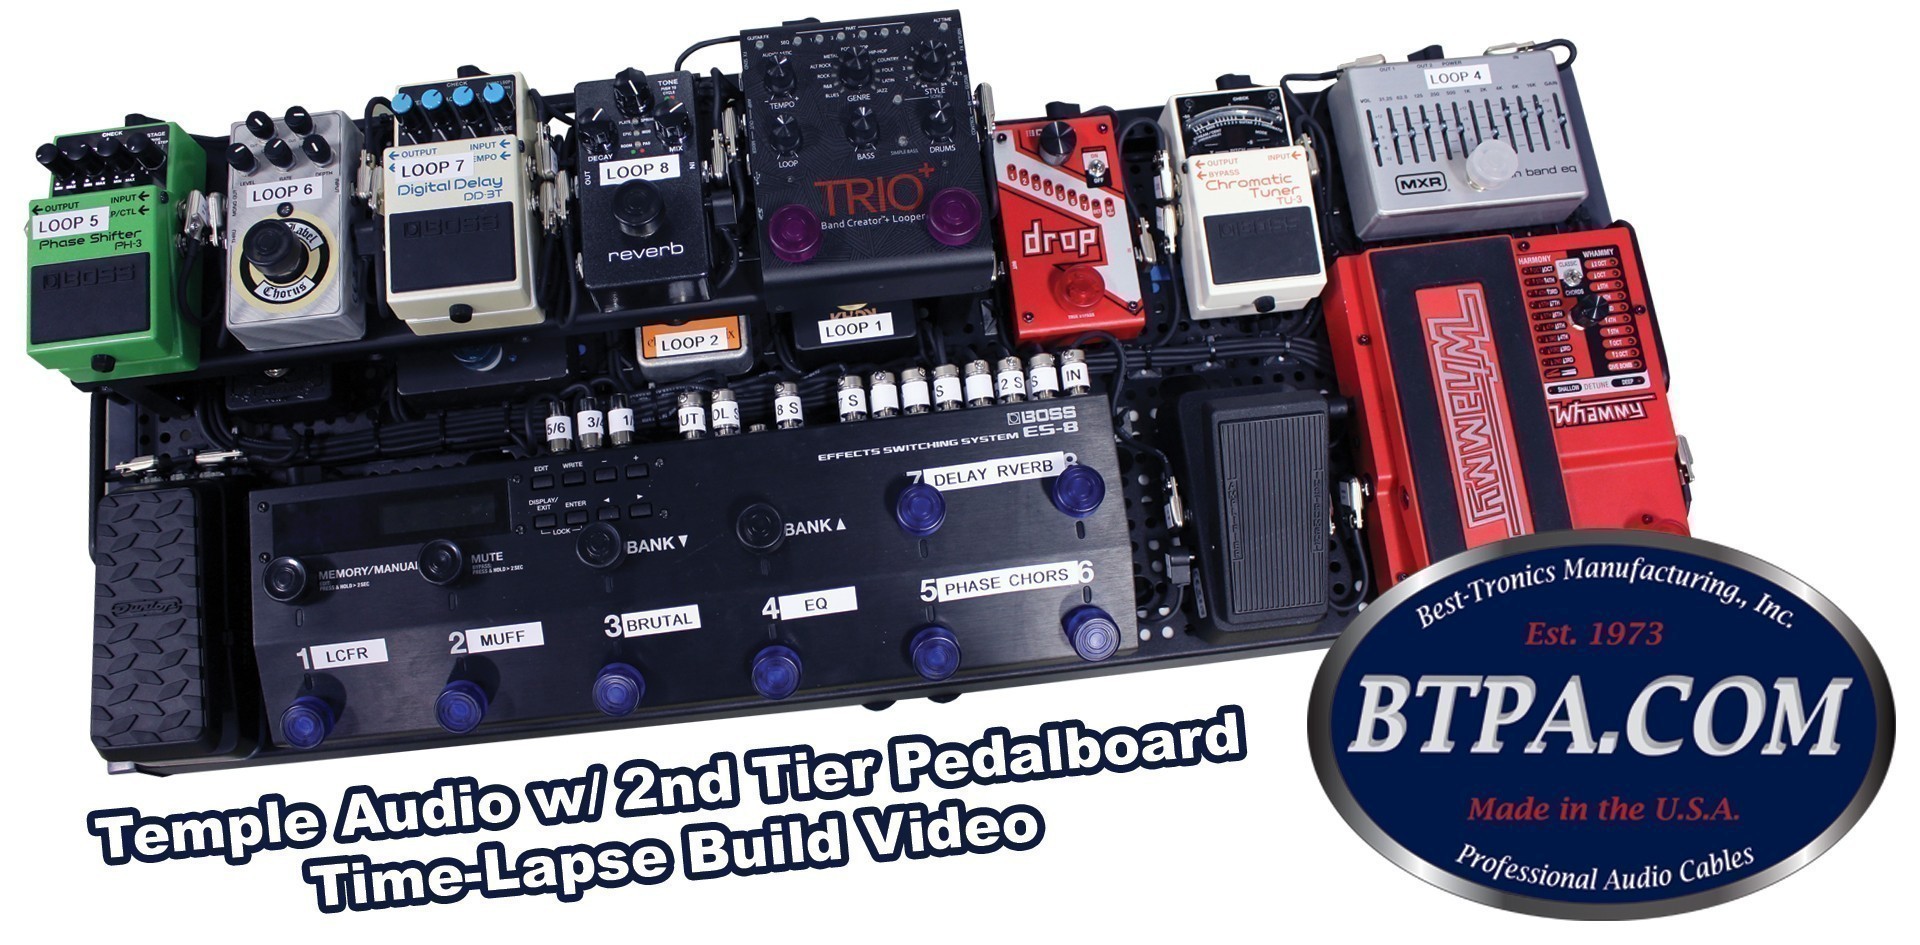 BTPA Time-Lapse Pedalboard Build Video - Templeboard w/ 2nd Tier